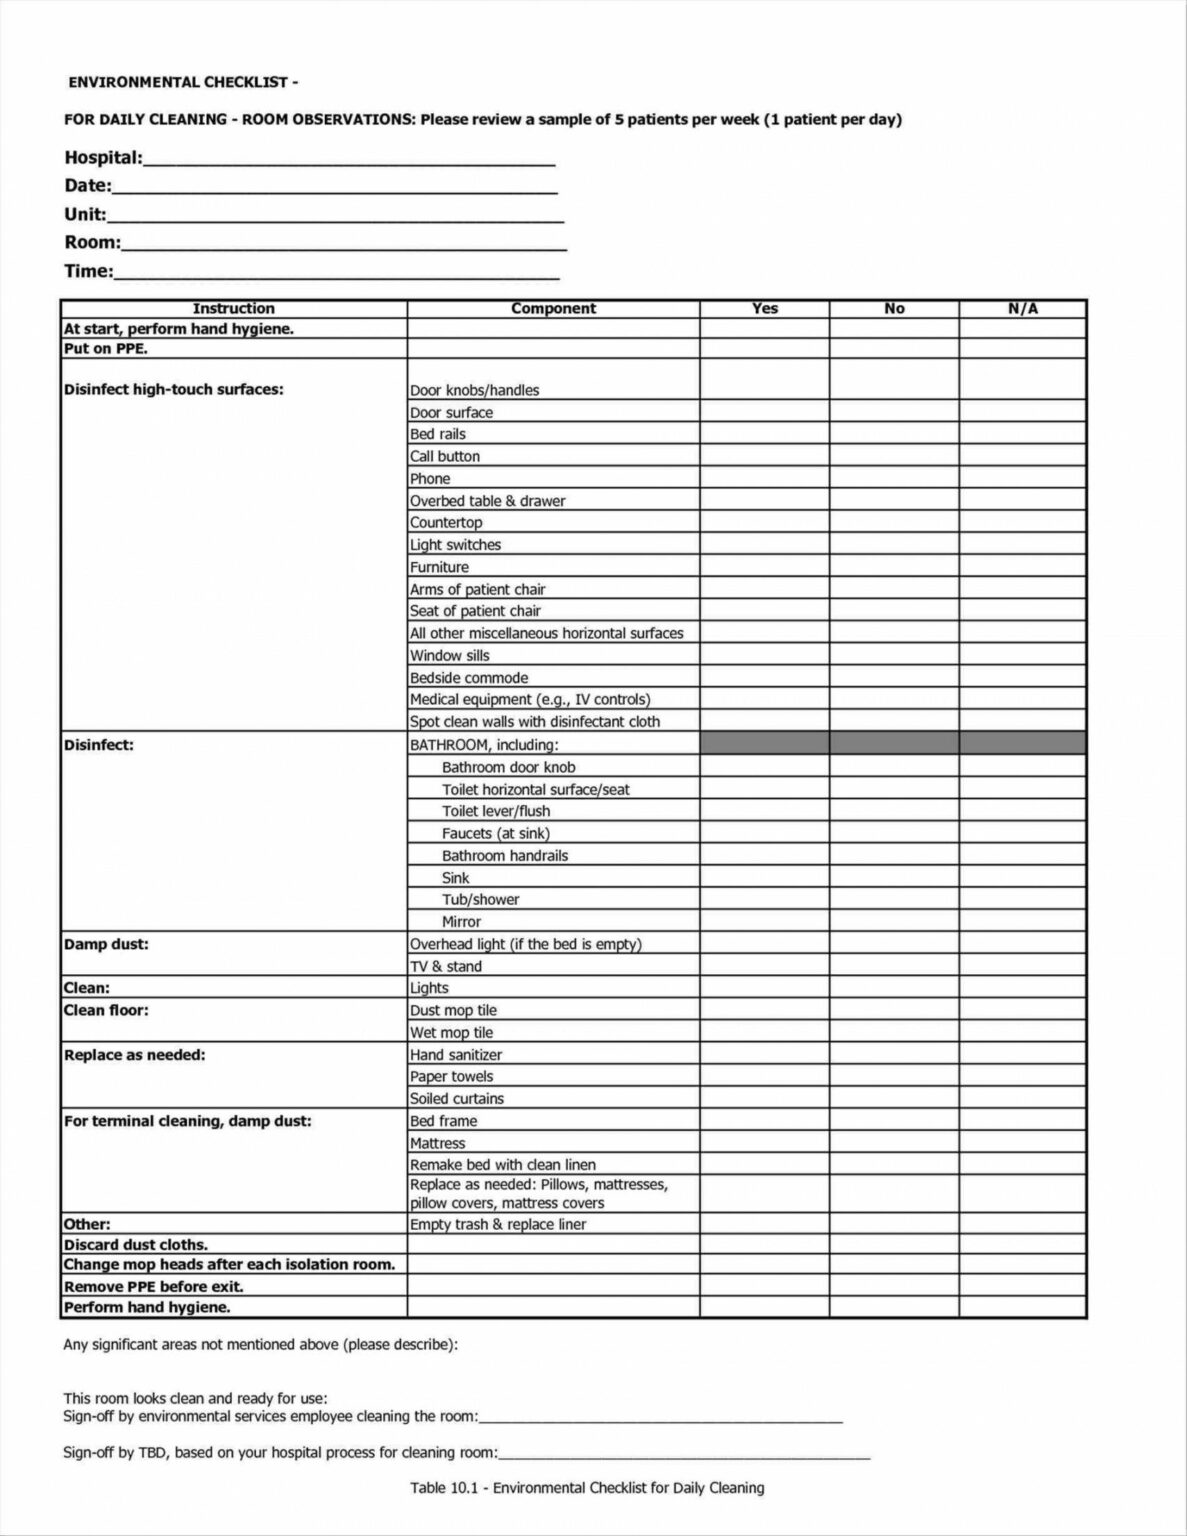 Free Checklist Template Samples Hotel Maintenance Excel Daily Pdf Room ...